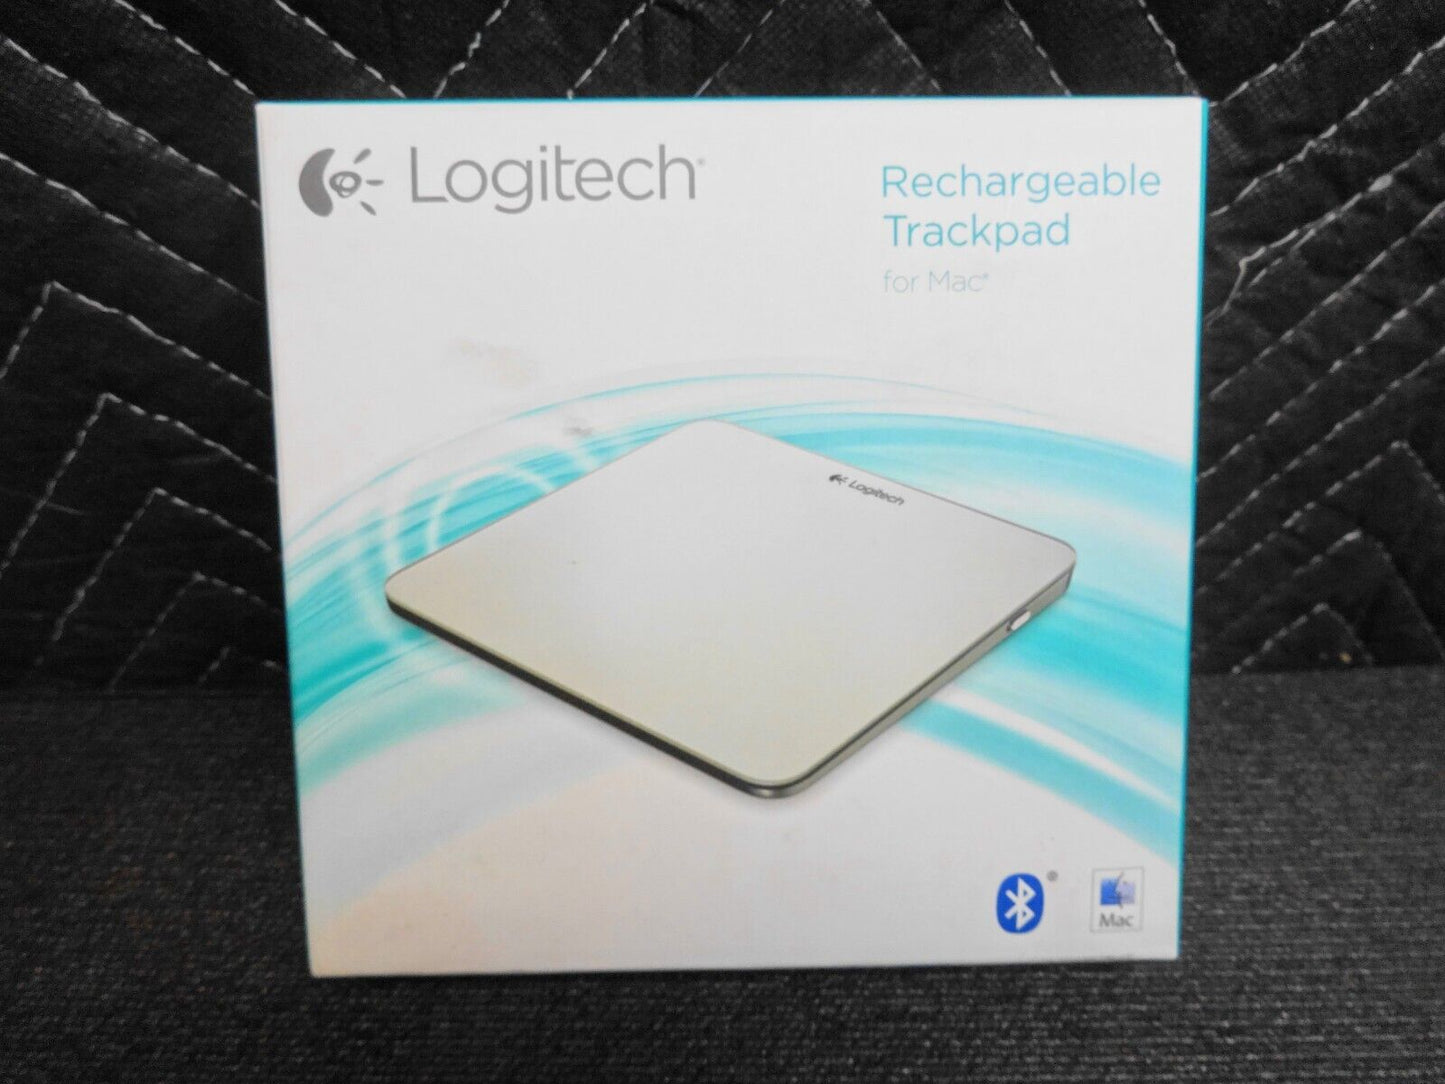 Logitech T651 Rechargeable Trackpad Touchpad for Mac 910-002880